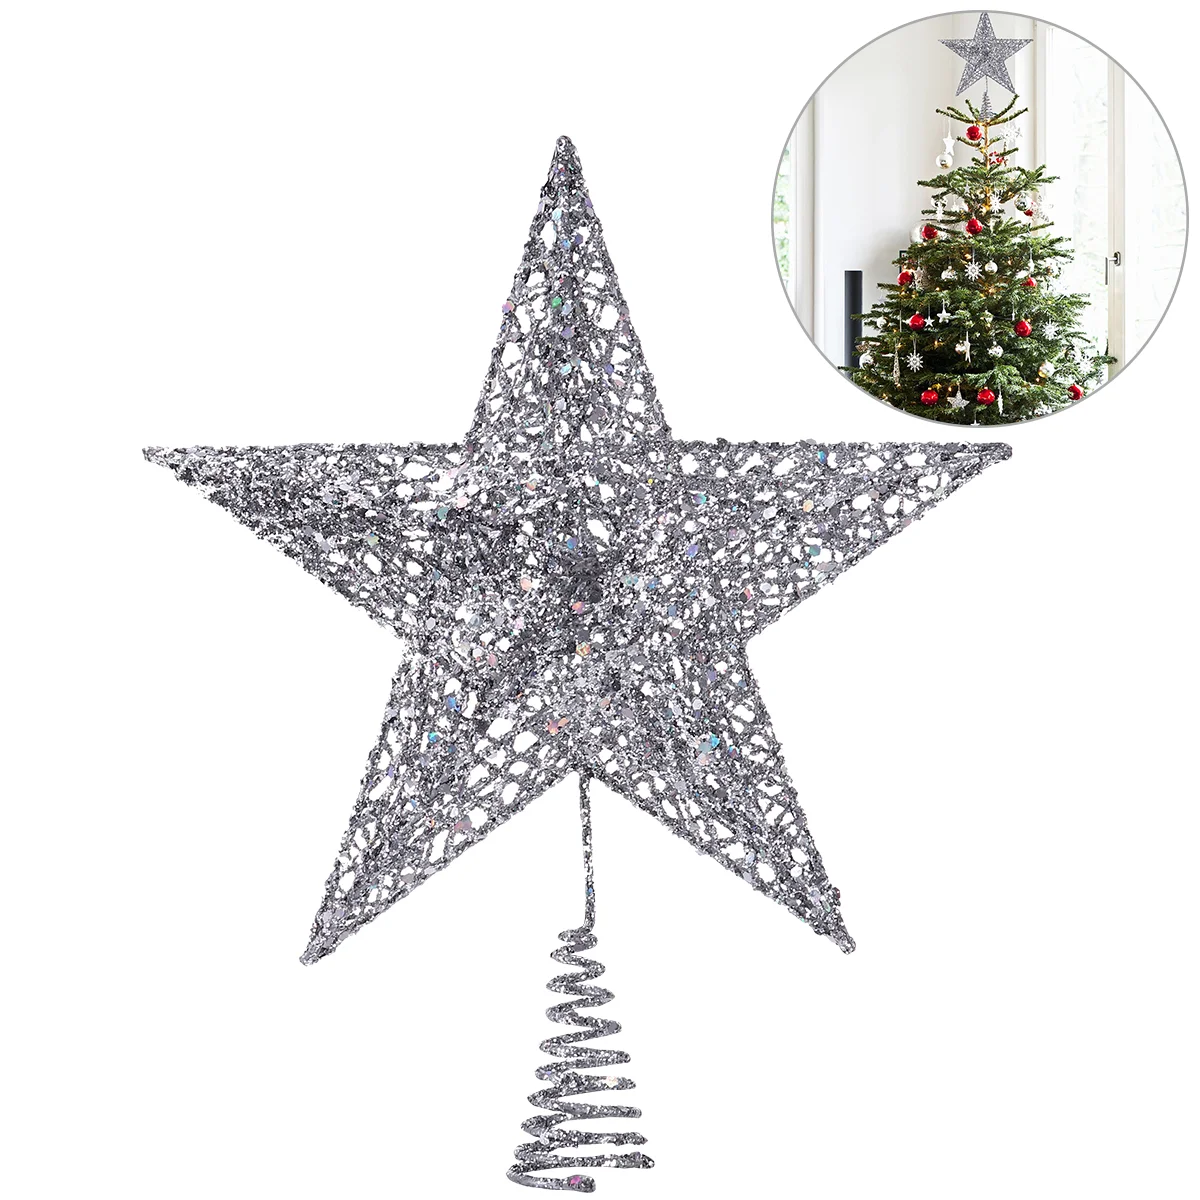 

NICEXMAS 25cm Silver Star Tree Topper Exquisite Shimmery Star Christmas Tree Topper Christmas Tree Decoration 5 Point Star